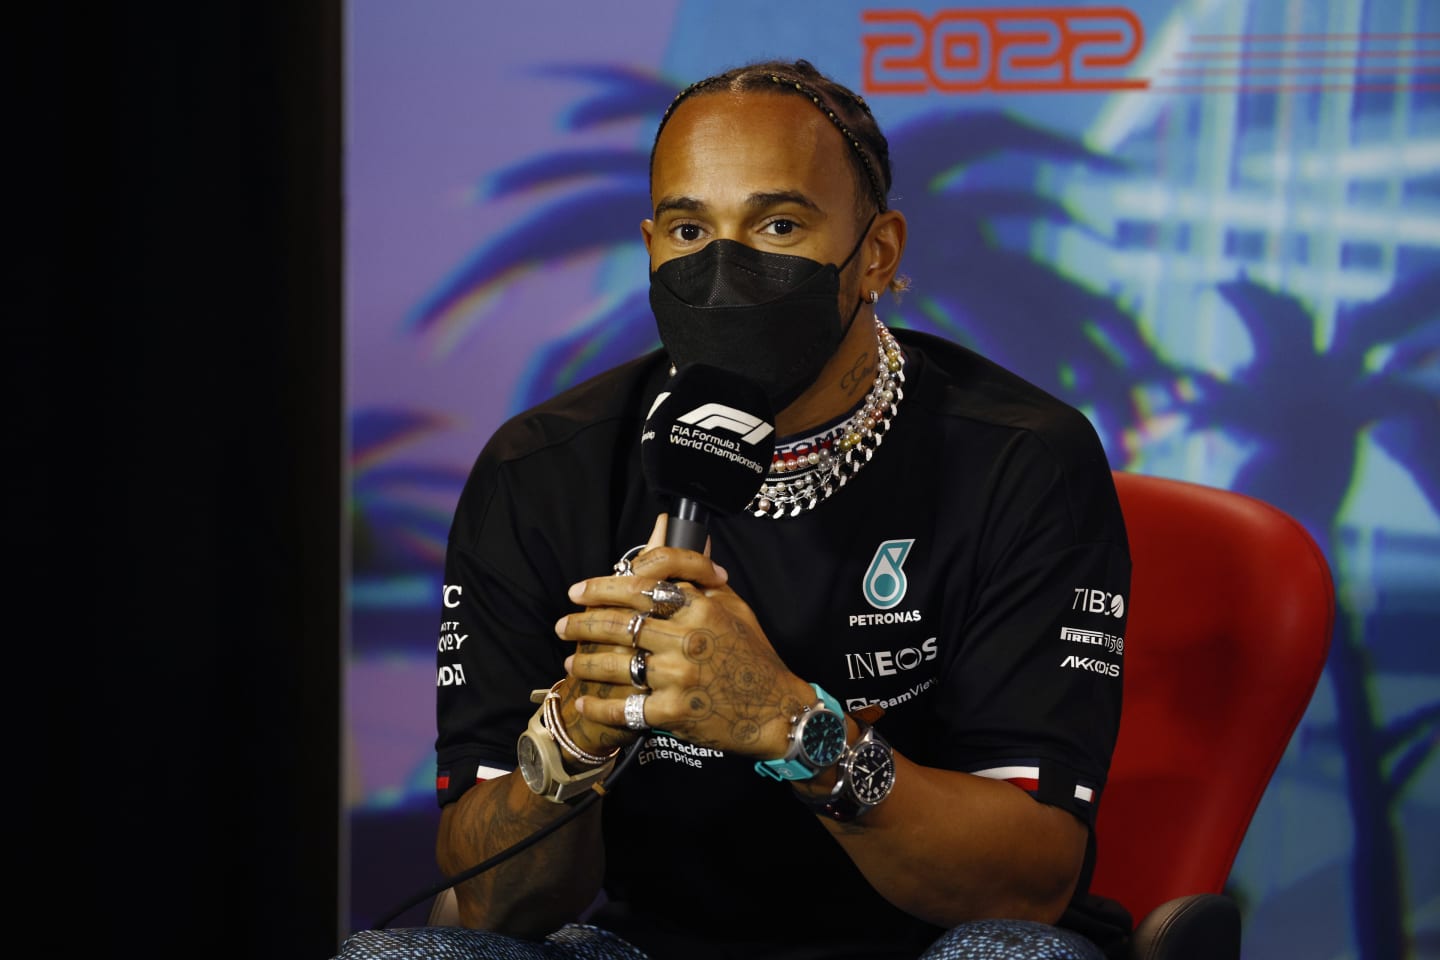 MIAMI, FLORIDA - MAY 06: Lewis Hamilton of Great Britain and Mercedes talks in the Drivers Press Conference prior to practice ahead of the F1 Grand Prix of Miami at the Miami International Autodrome on May 06, 2022 in Miami, Florida. (Photo by Jared C. Tilton/Getty Images)